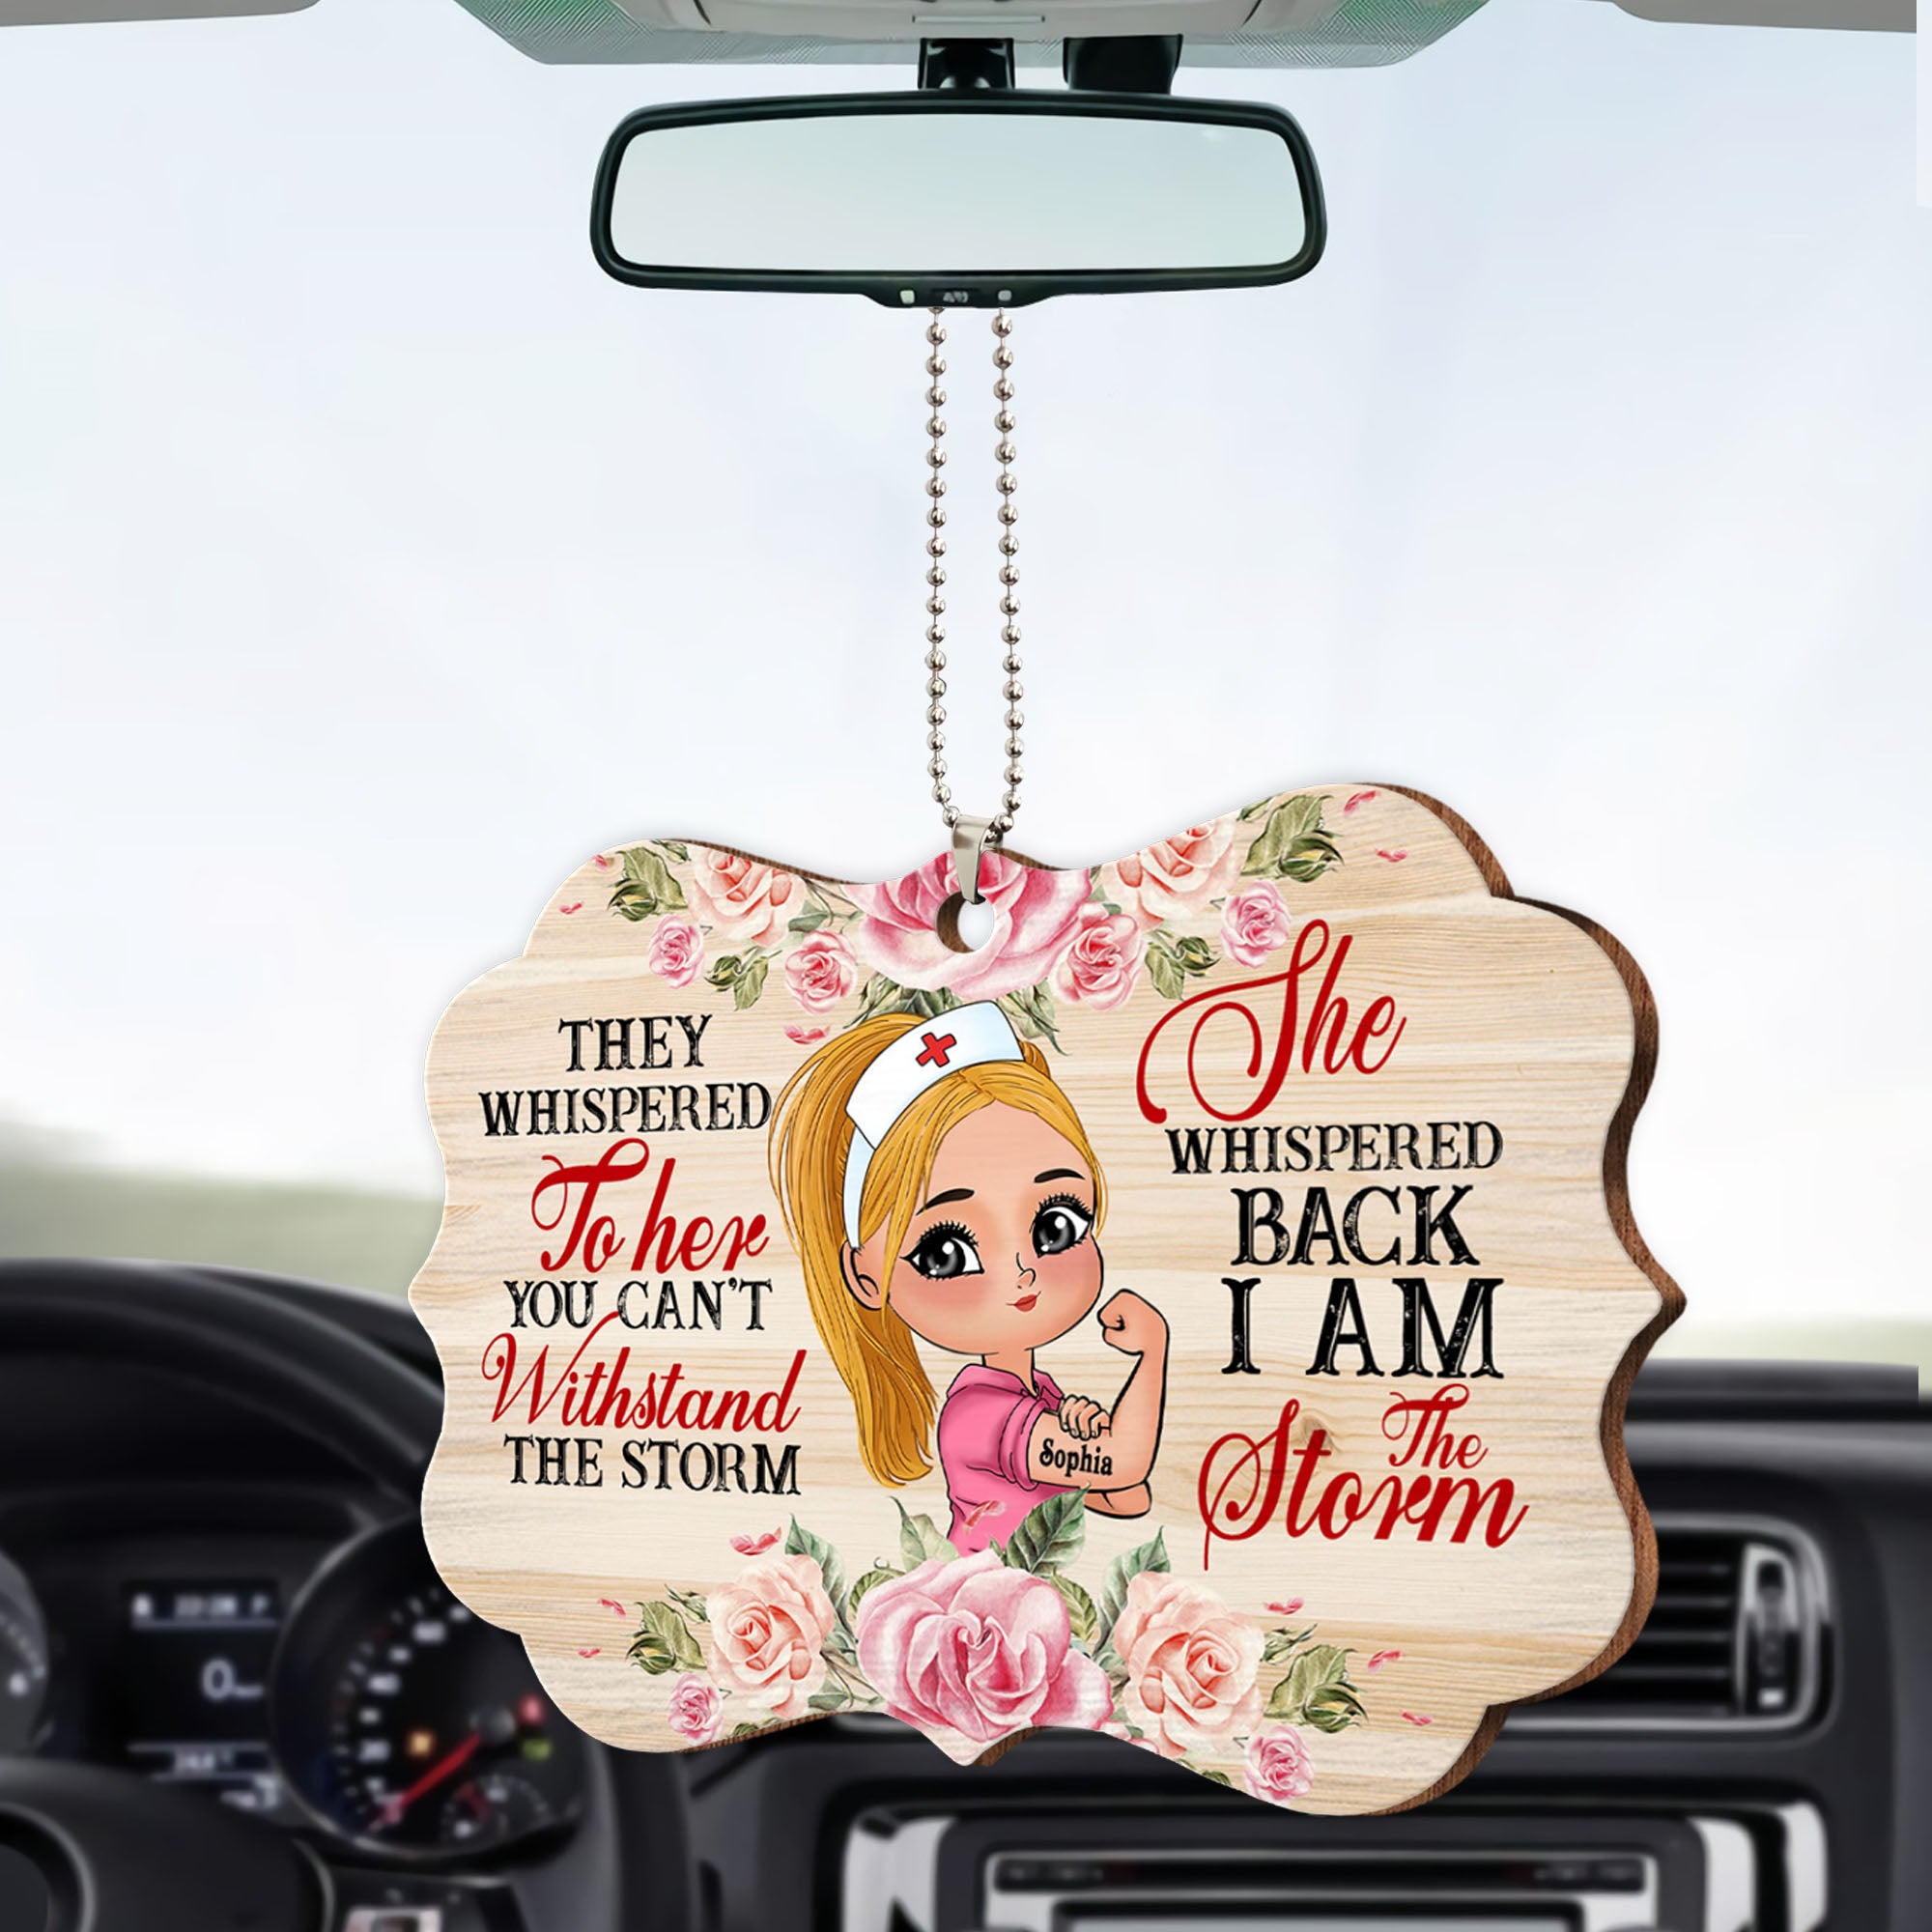 They Whispered To Her You Cannot Withstand The Storm She Whispered Back I Am The Storm - Personalized Wooden Ornament - Gift For Nurse